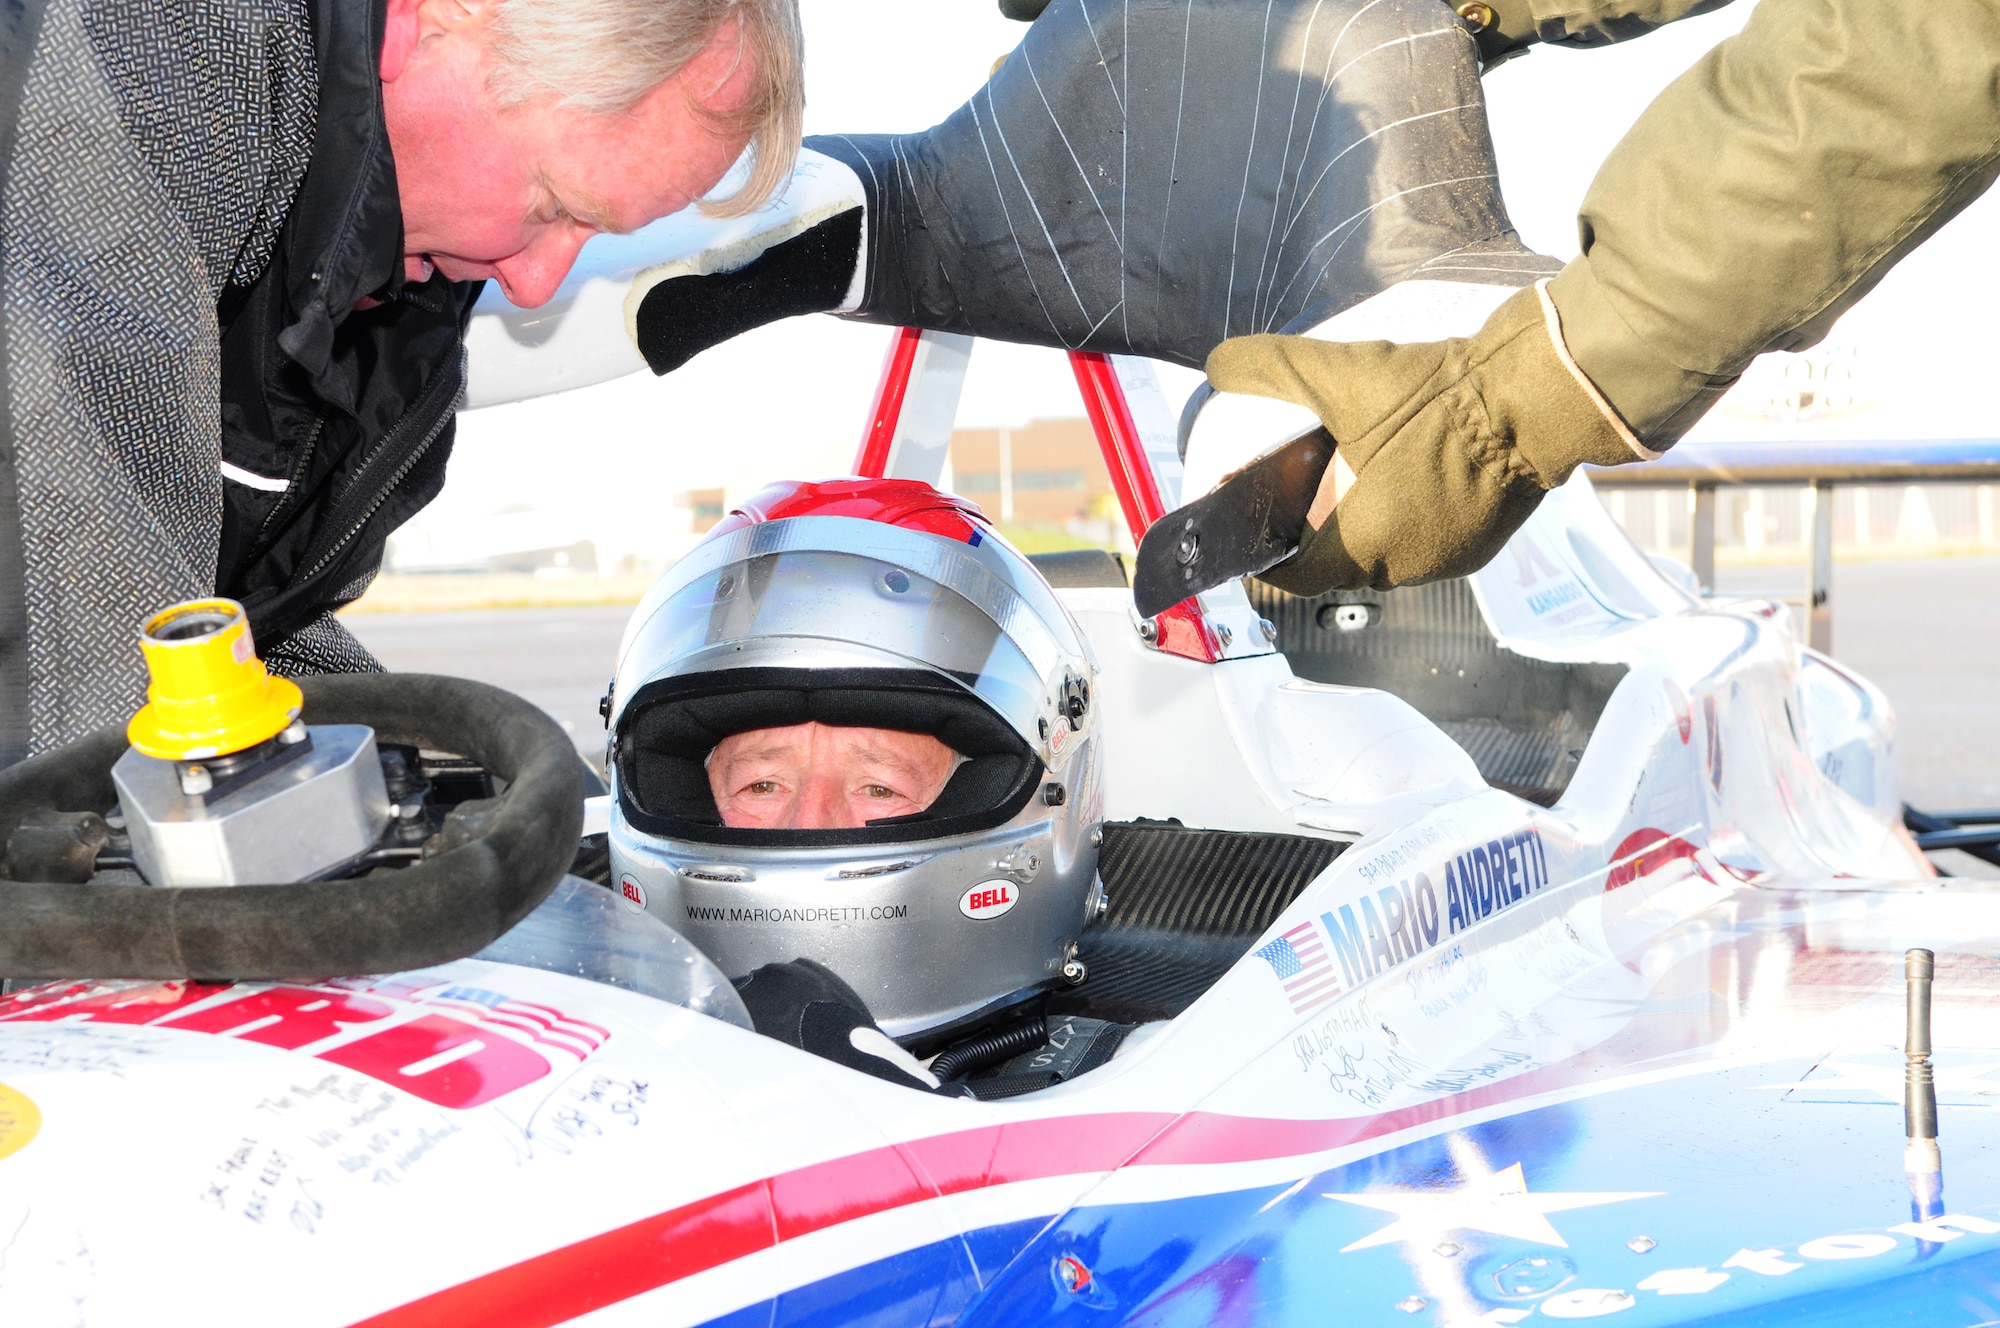 RAF MILDENHALL, England – Racing legend Mario Andretti, winner of 12 Formula 1 Grand Prixs, second place in all-time wins and all-time pole position winner in IndyCar racing, sits patiently in the two-seater IndyCar as final adjustments and checks are made to the car before he drives it down the flightline here Jan. 21, 2011. Base members from both RAFs Mildenhall and Lakenheath took turns in the passenger seat of the race car, and reached speeds of up to 150 mph as Andretti, along with British driver Martin Plowman, an Indy Lights racing driver, gave them the thrill of a lifetime. (U.S. Air Force photo/Karen Abeyasekere)